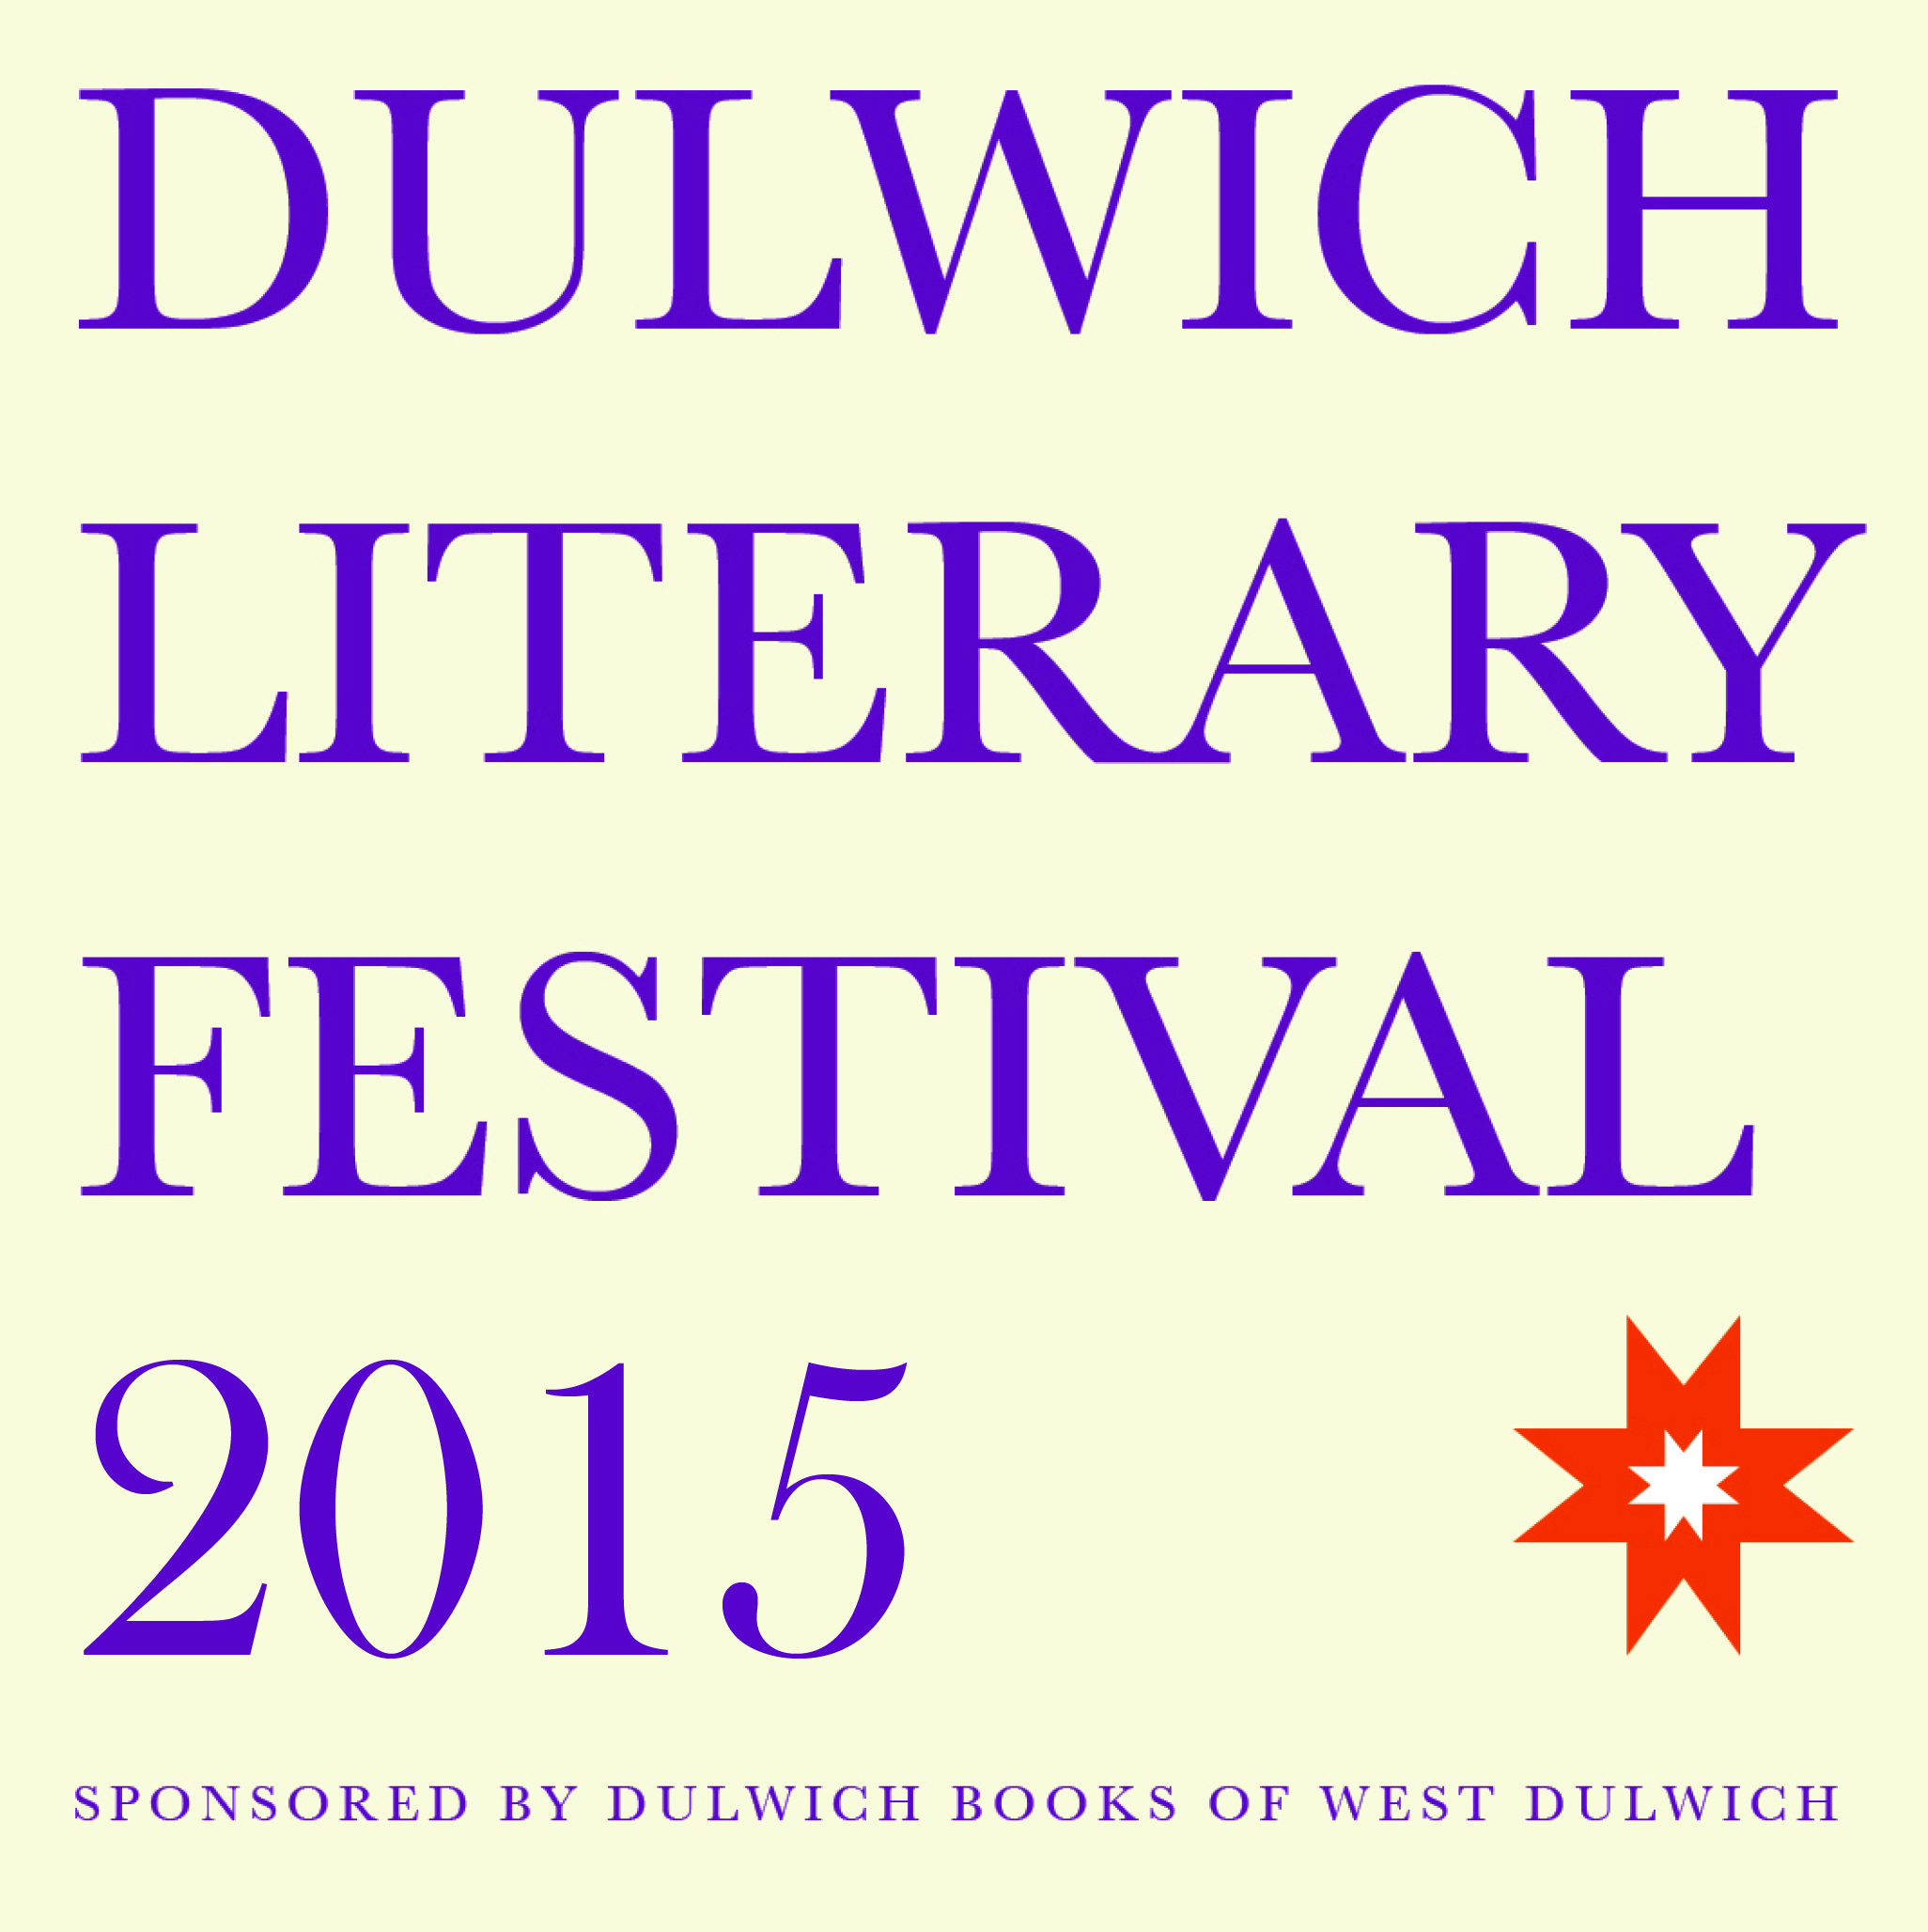 Announcing the first Dulwich Literary Festival